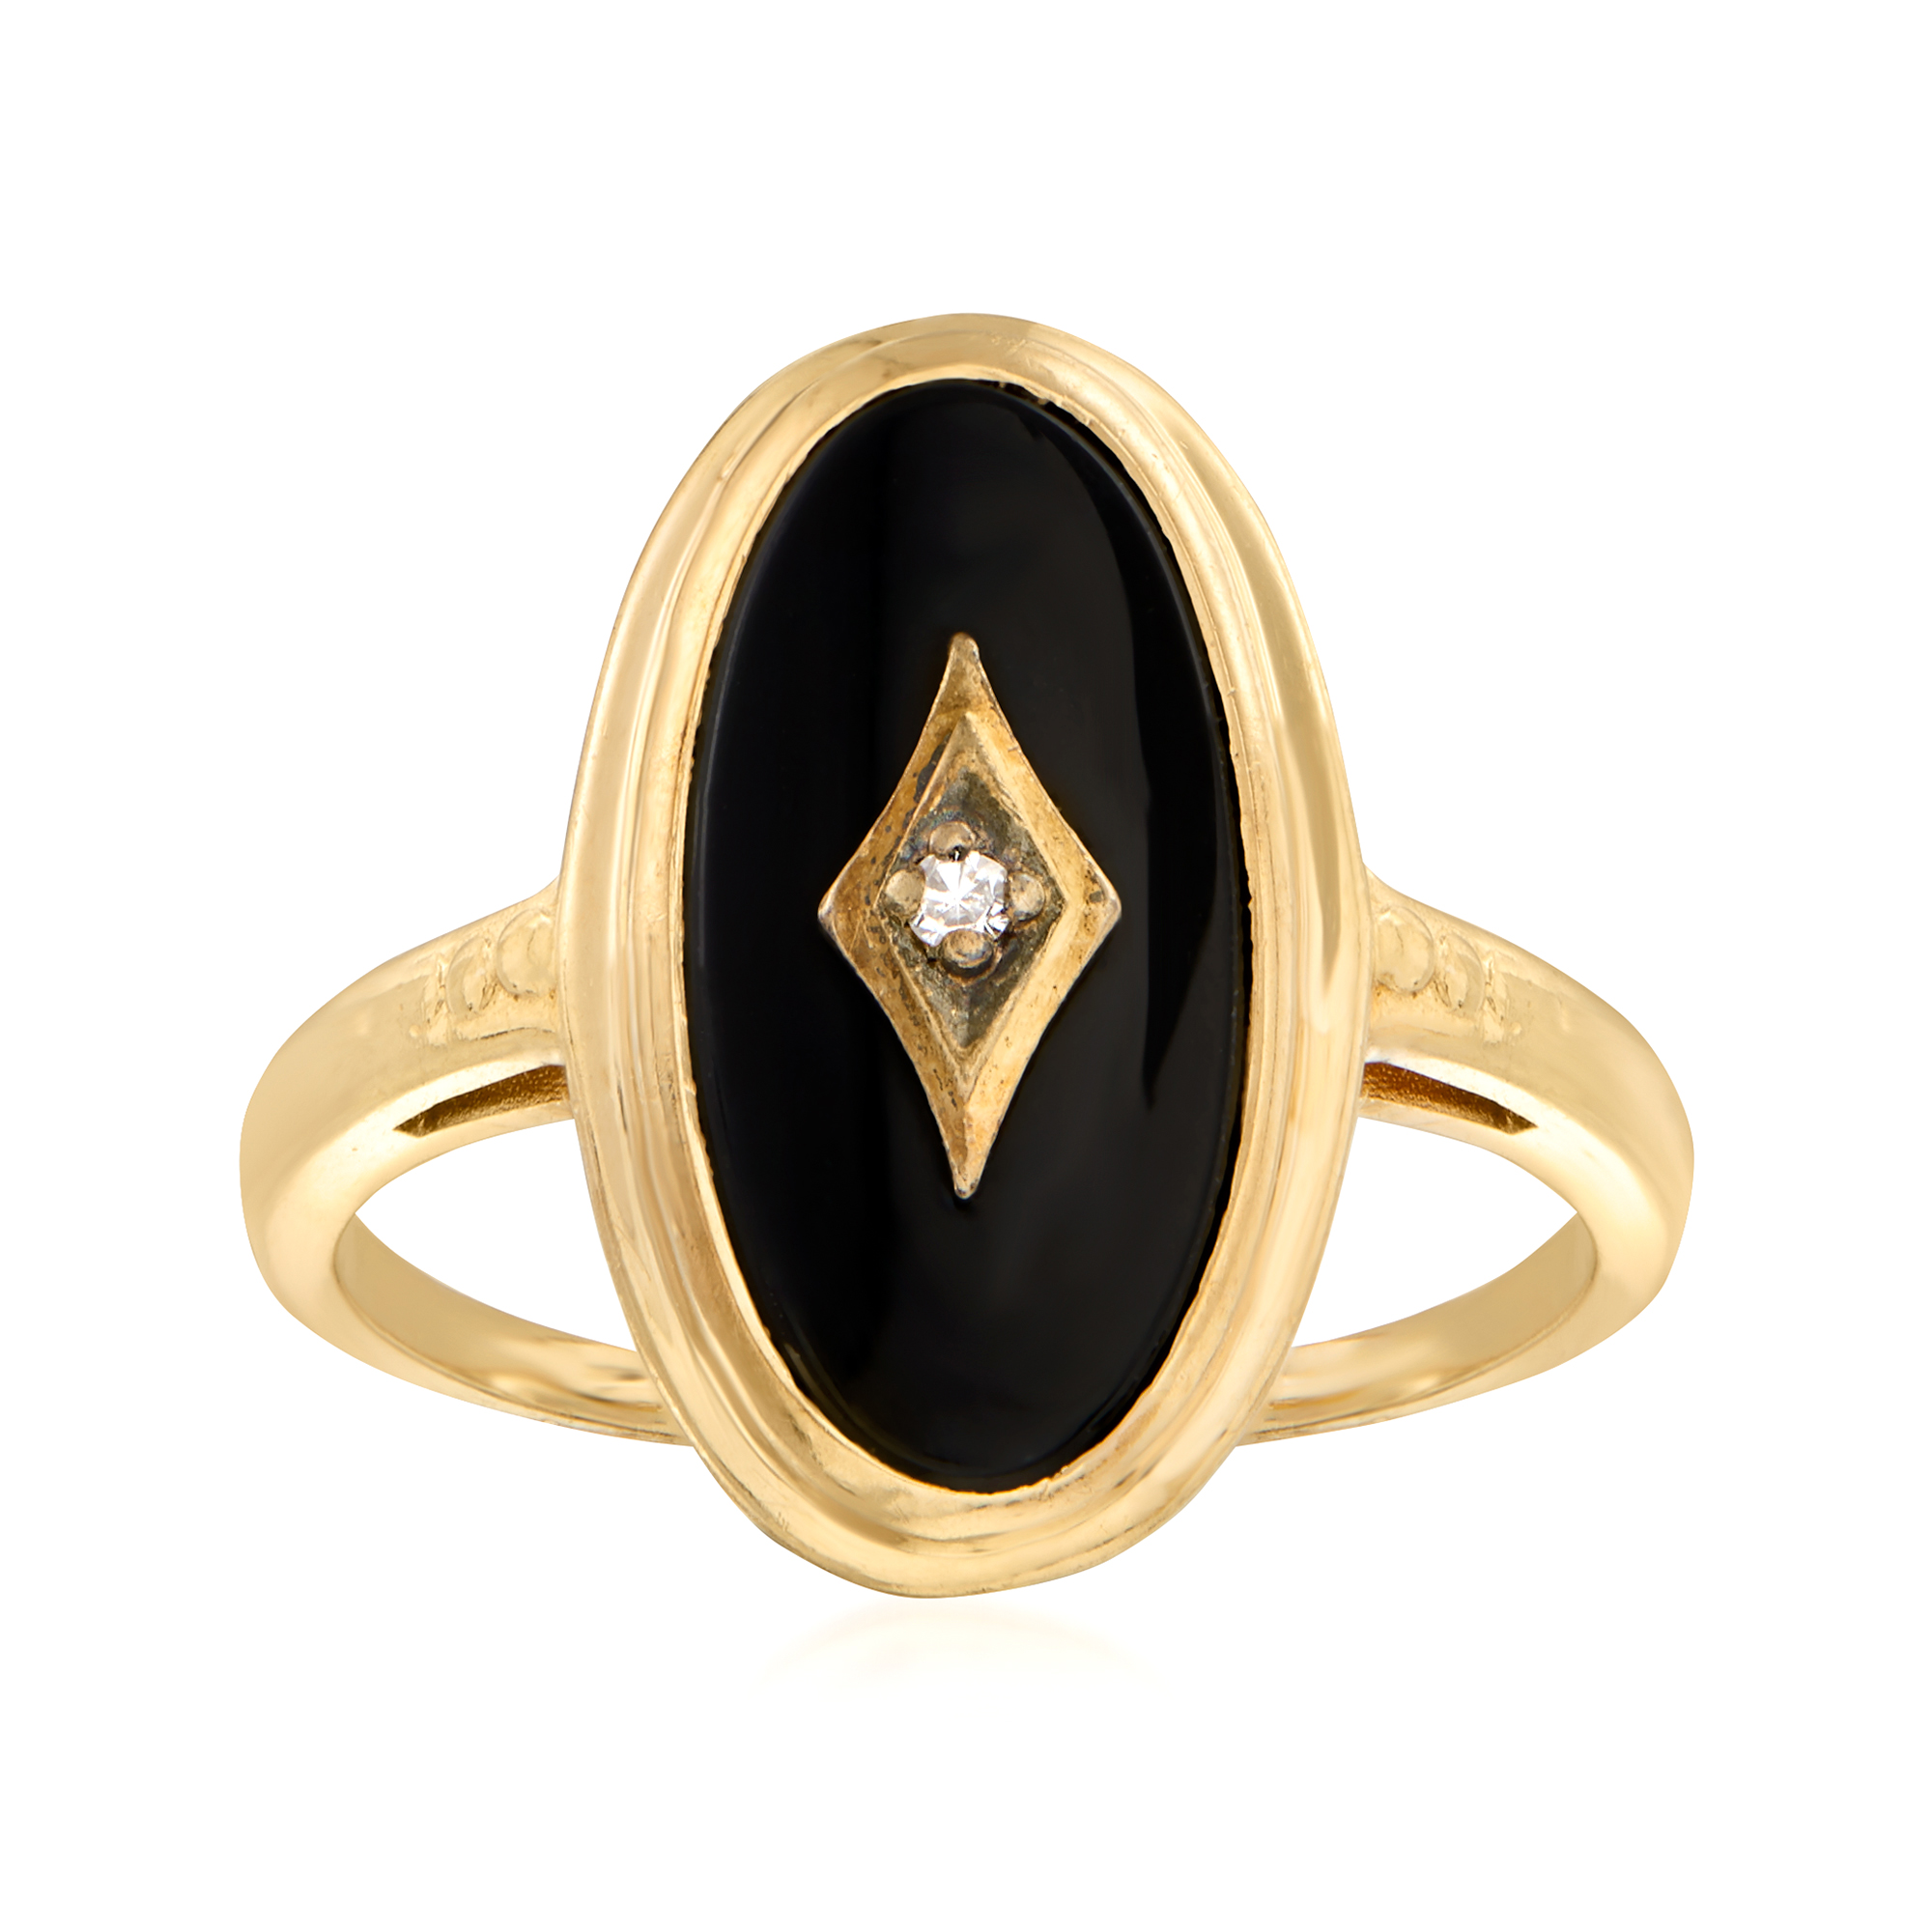 C 1940 Vintage Black Onyx Ring With Diamond Accents In 14kt Yellow Gold Ross Simons